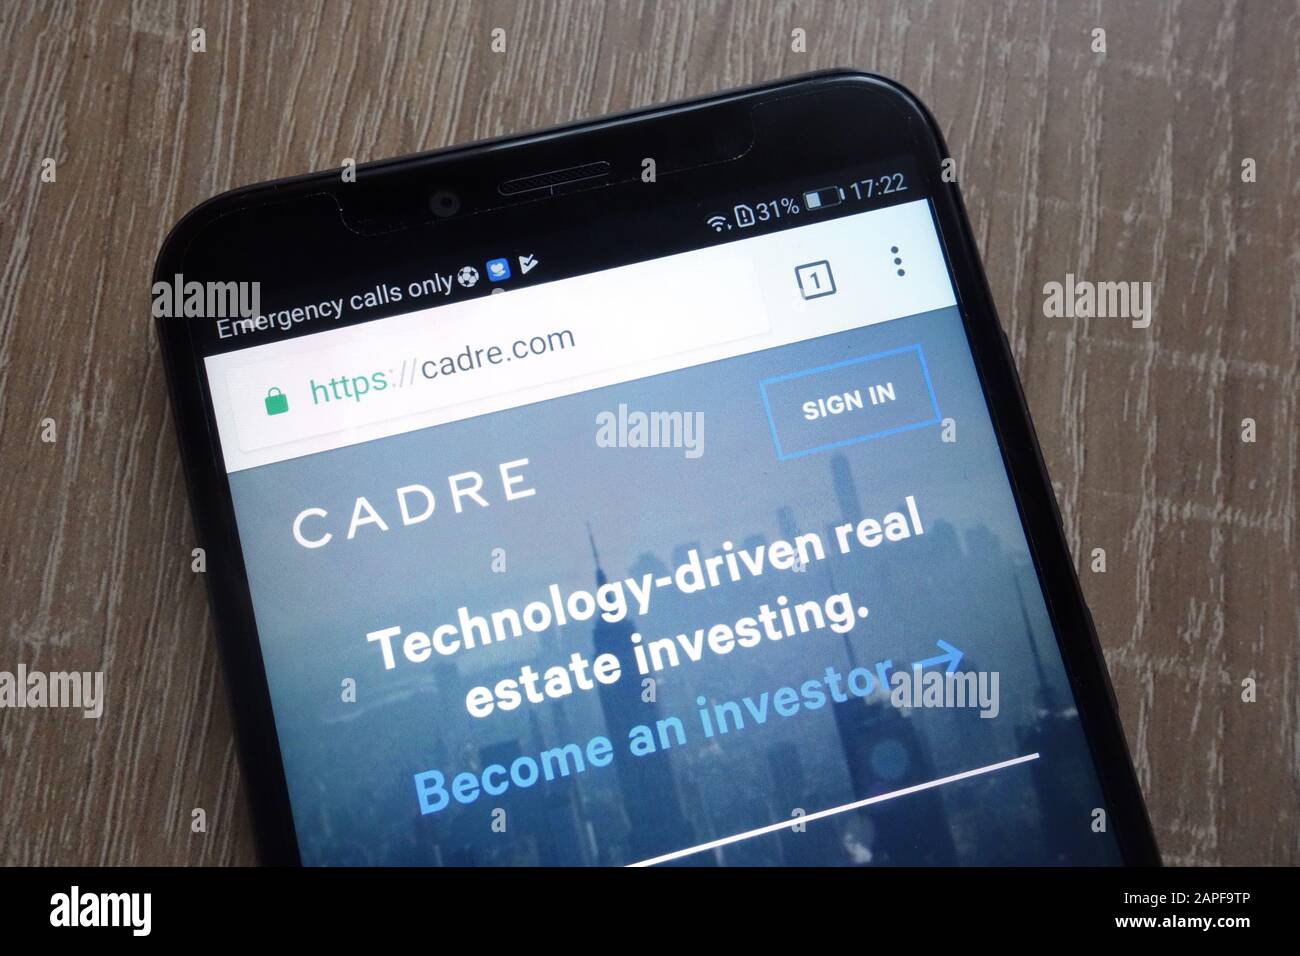 Cadre fintech company website displayed on a modern smartphone Stock Photo